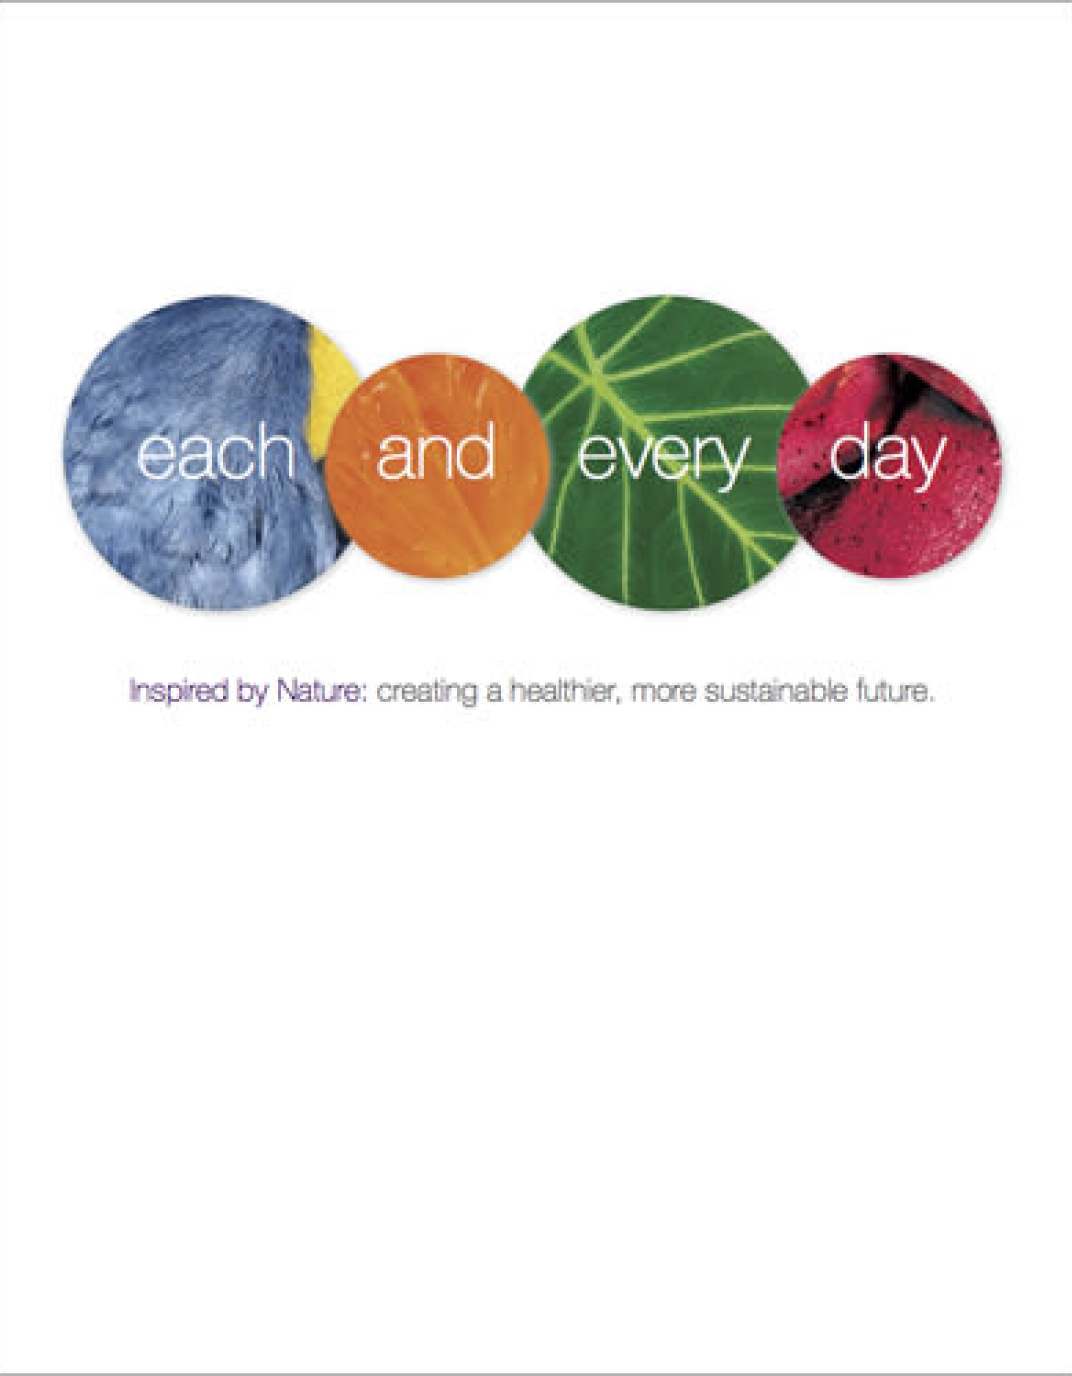 The cover of the 2014 TELUS Sustainability Report